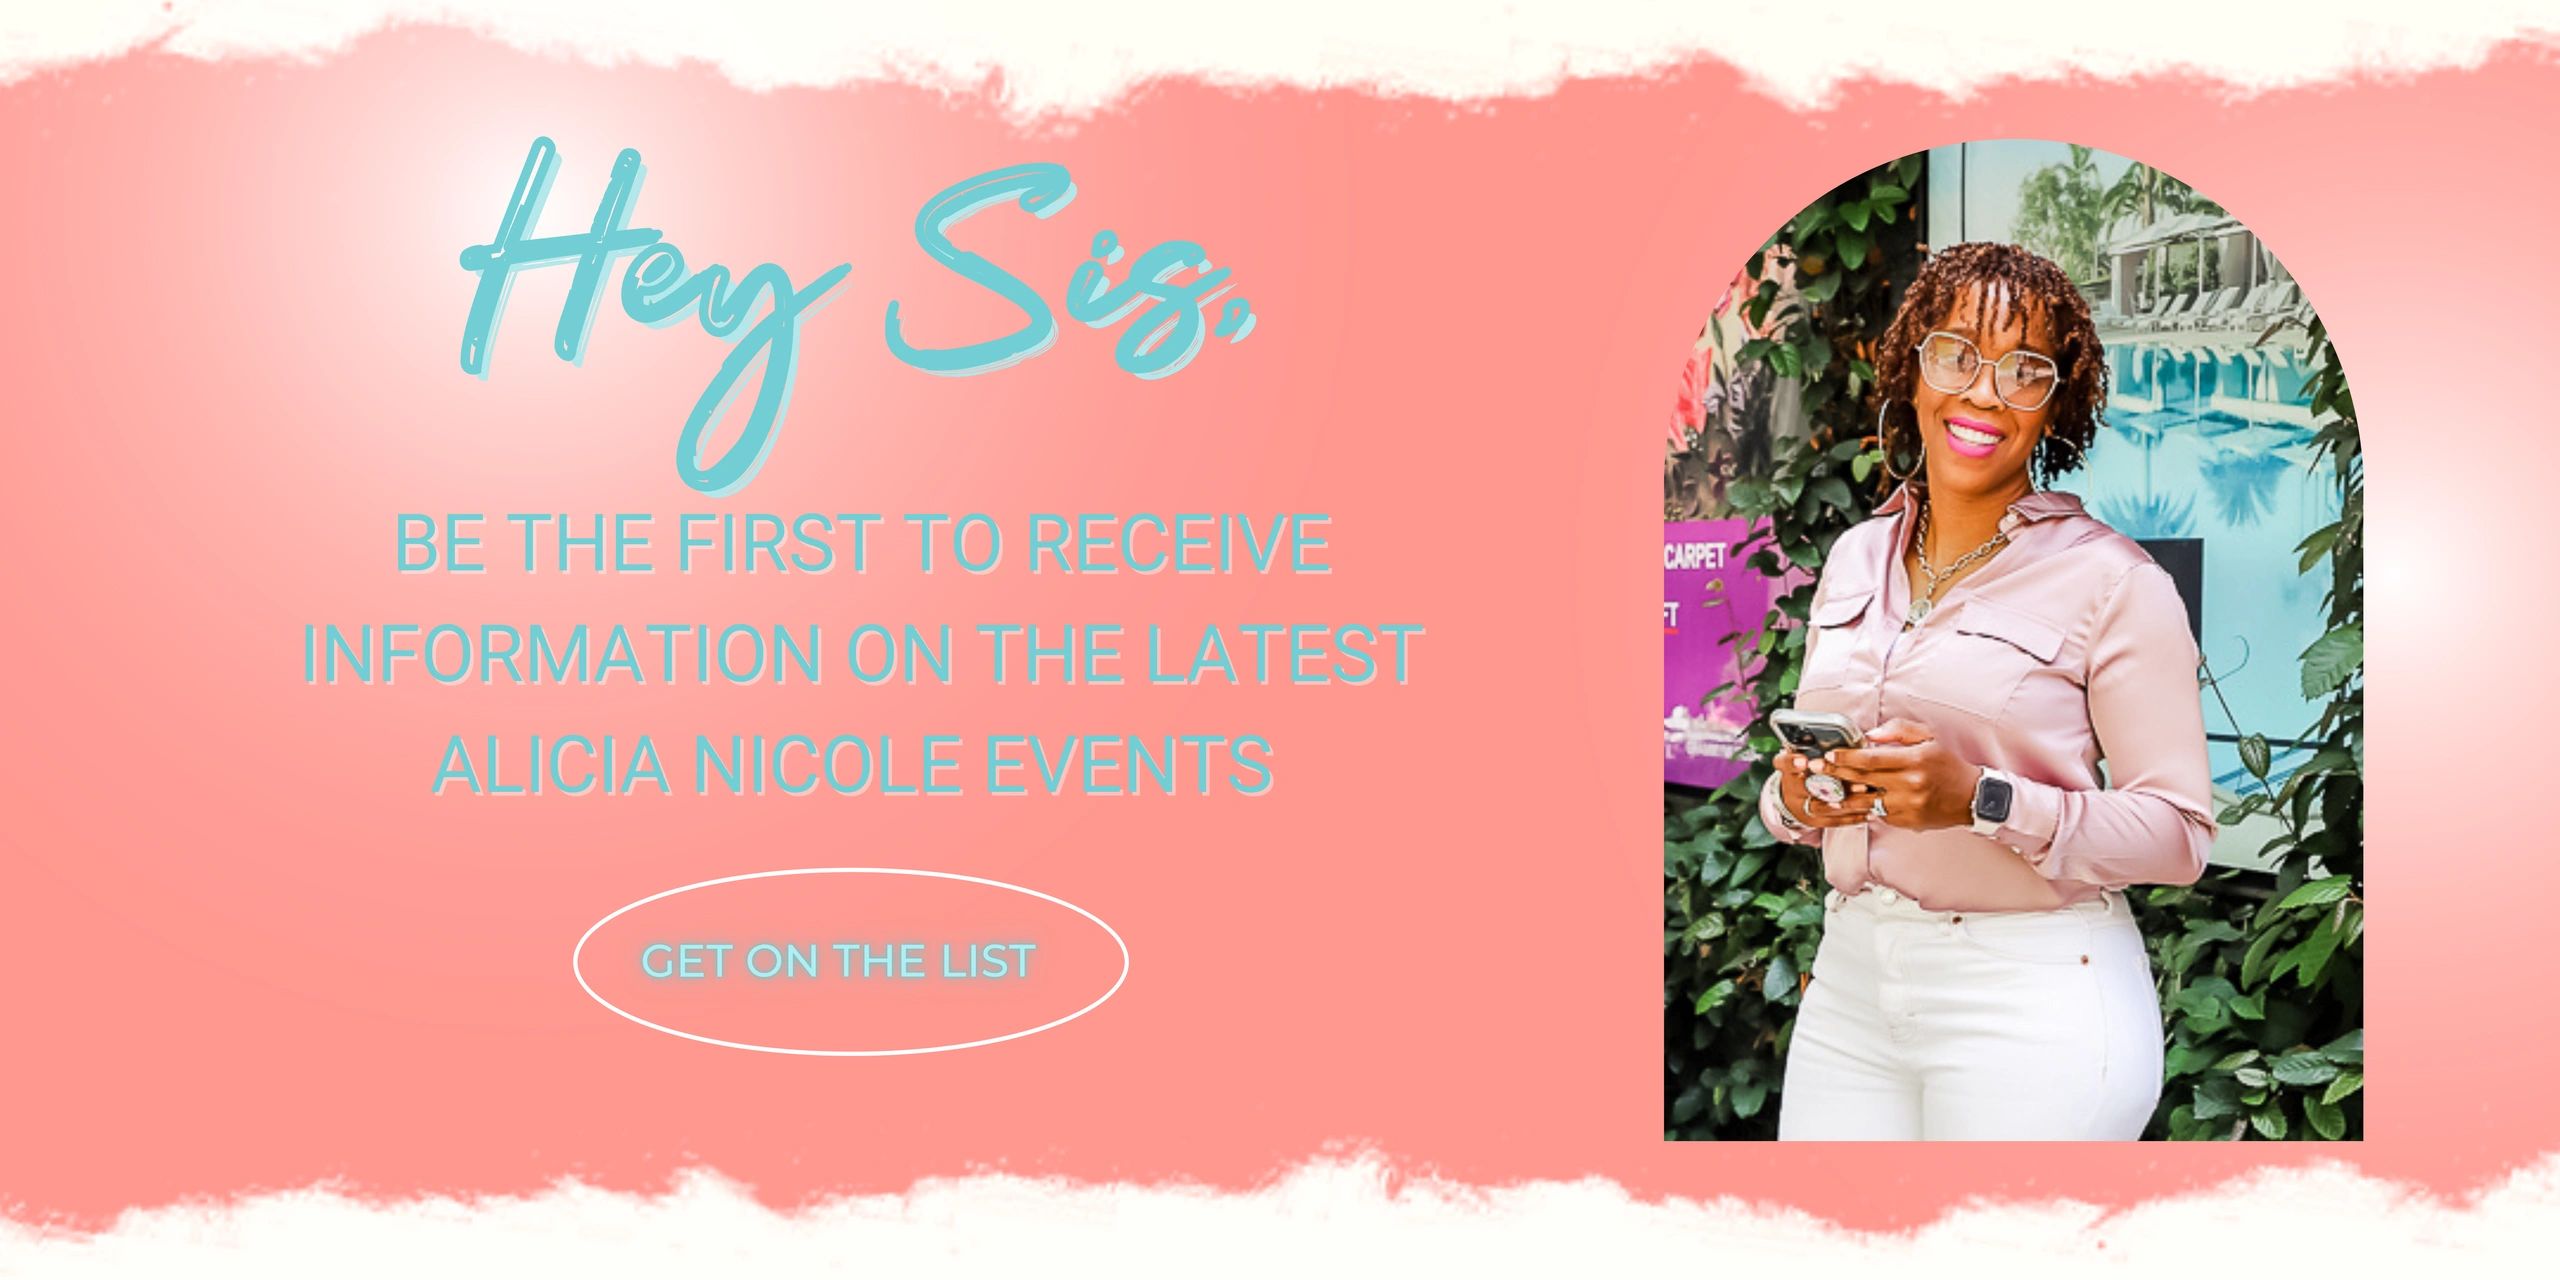 Get on the list and stay in the know about upcoming Alicia Nicole events.